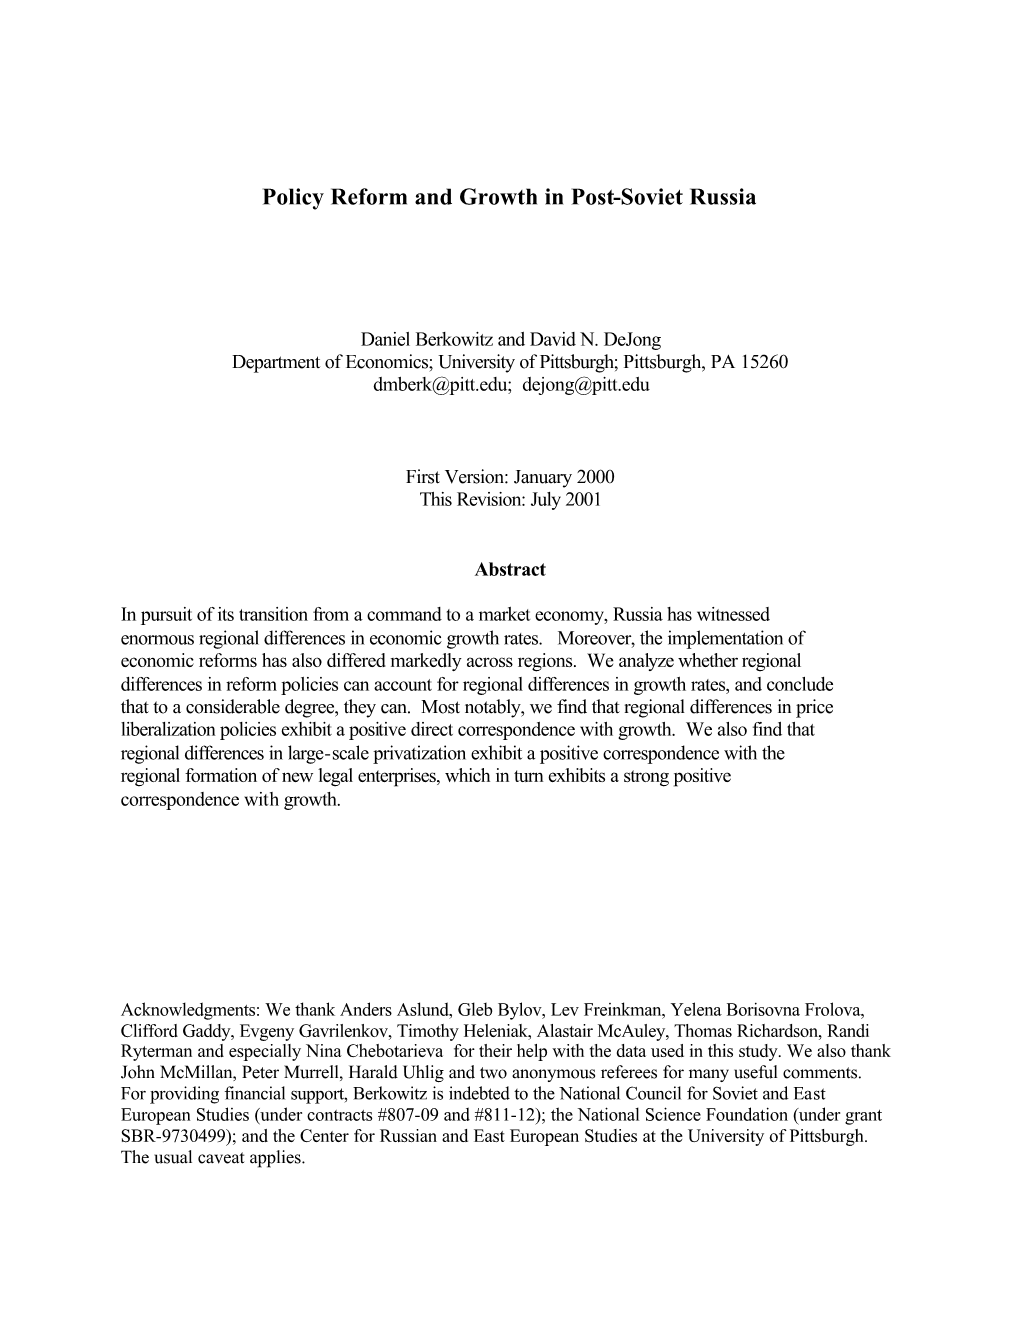 Policy Reform and Growth in Post-Soviet Russia